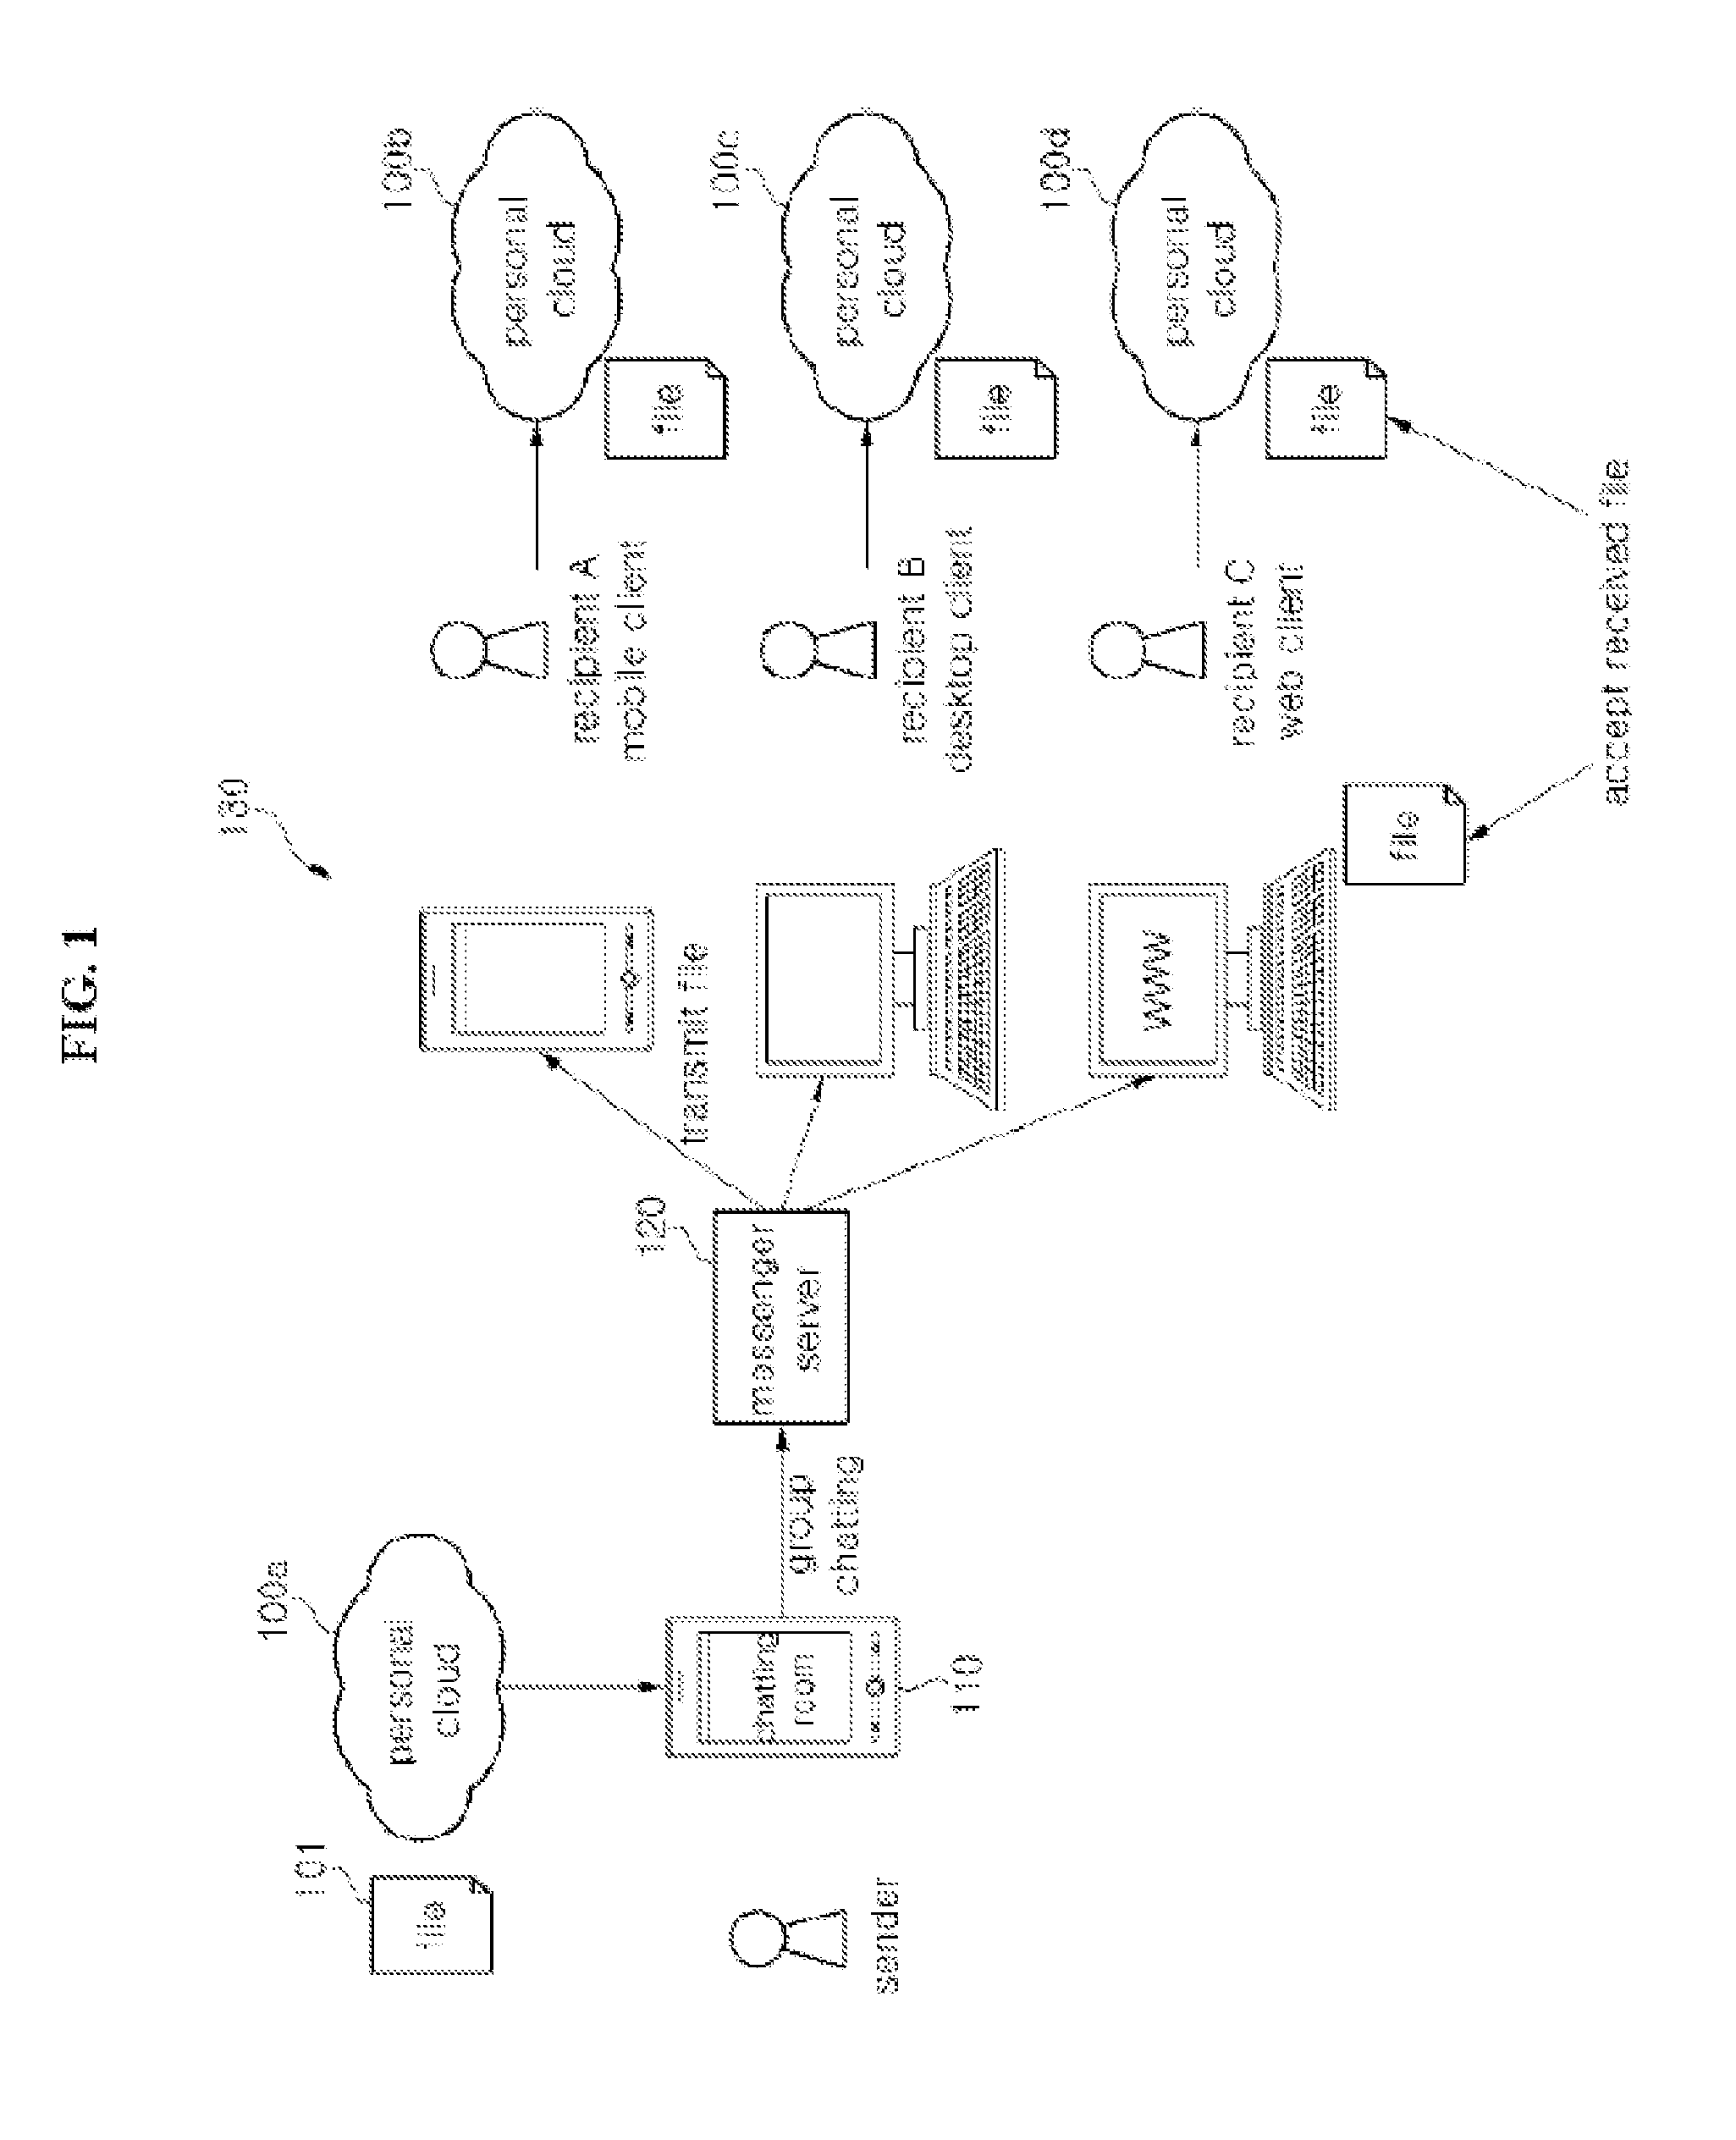 Group messaging system and method for providing file sharing through bidirectional interlock with a cloud server